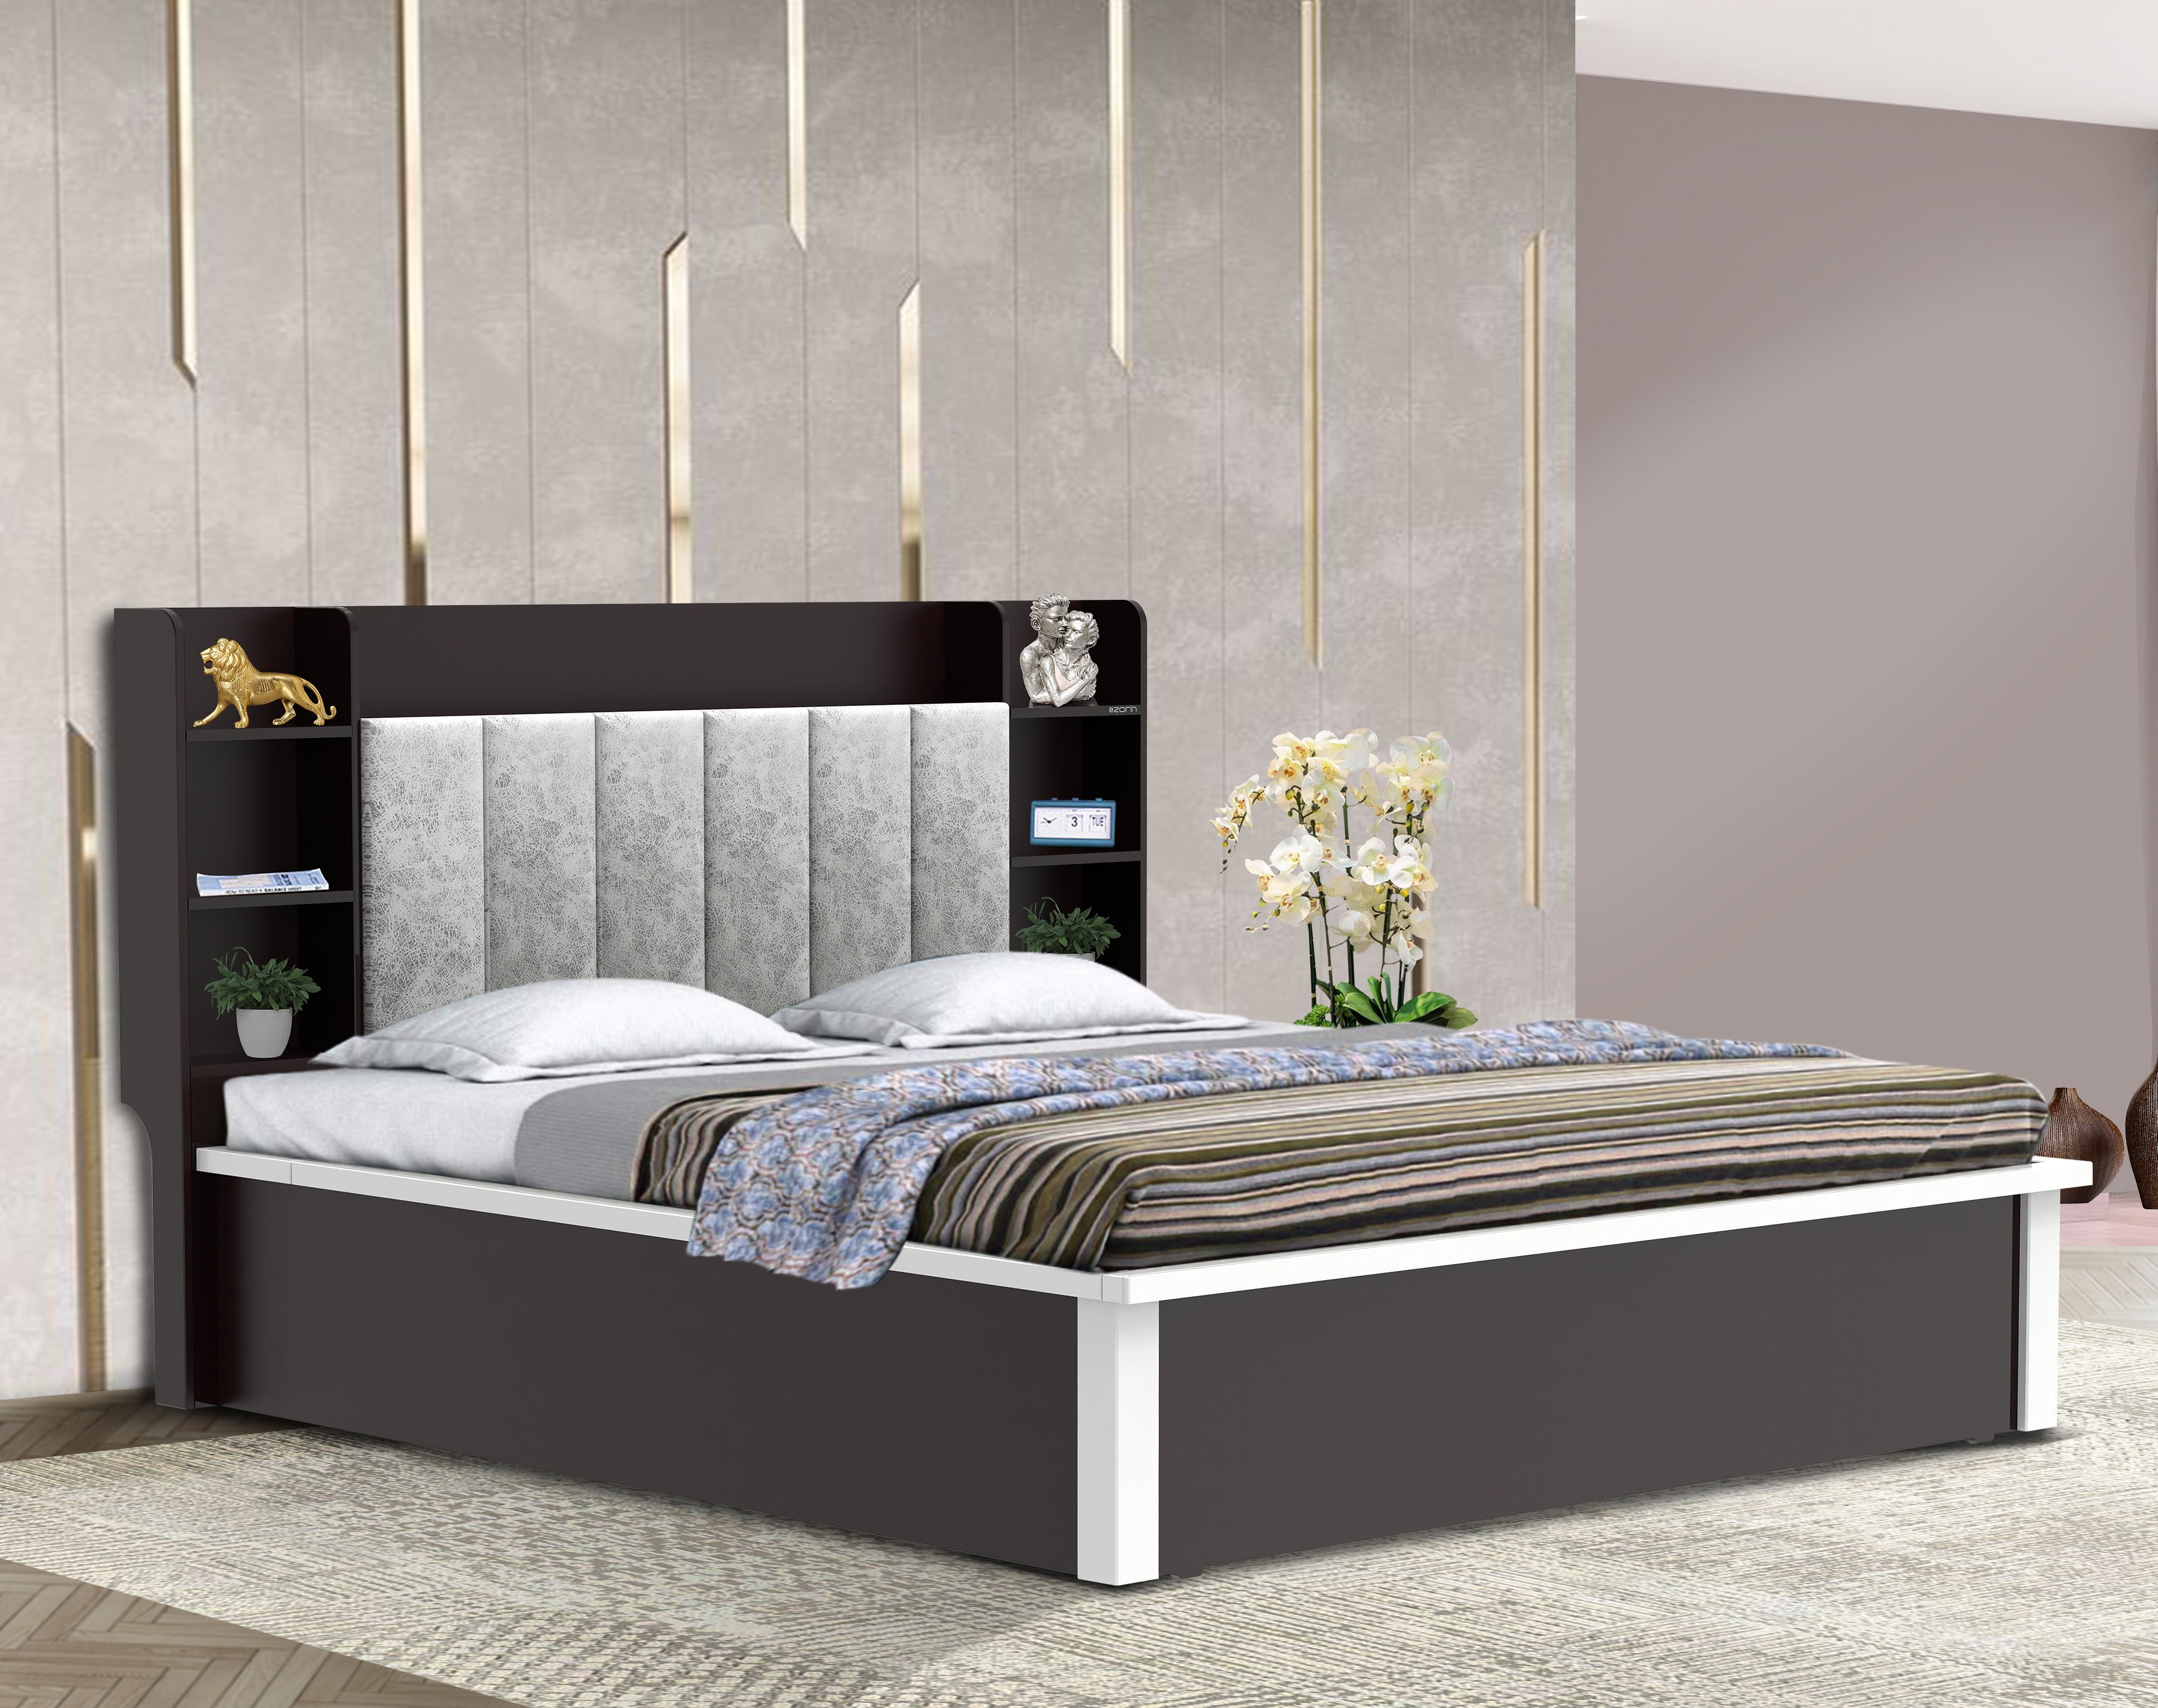 Manor King Bed With Storage Zorin